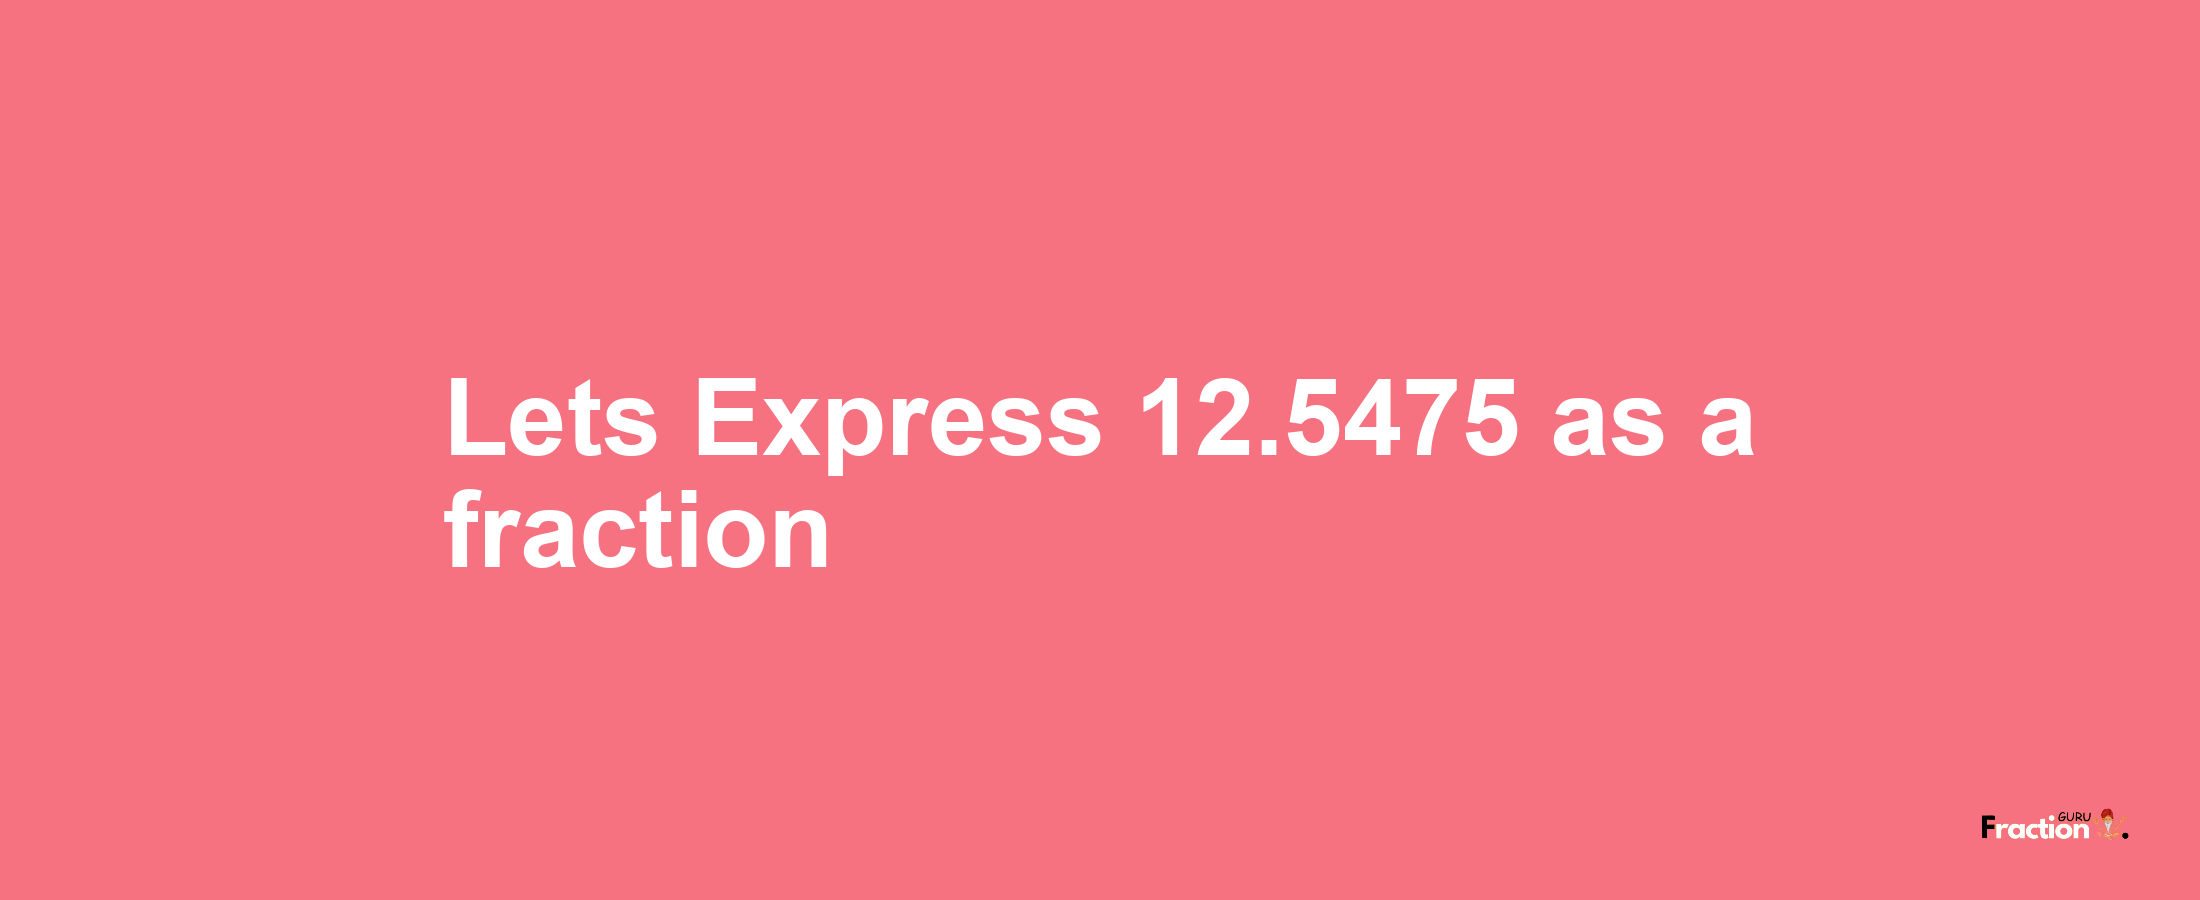 Lets Express 12.5475 as afraction